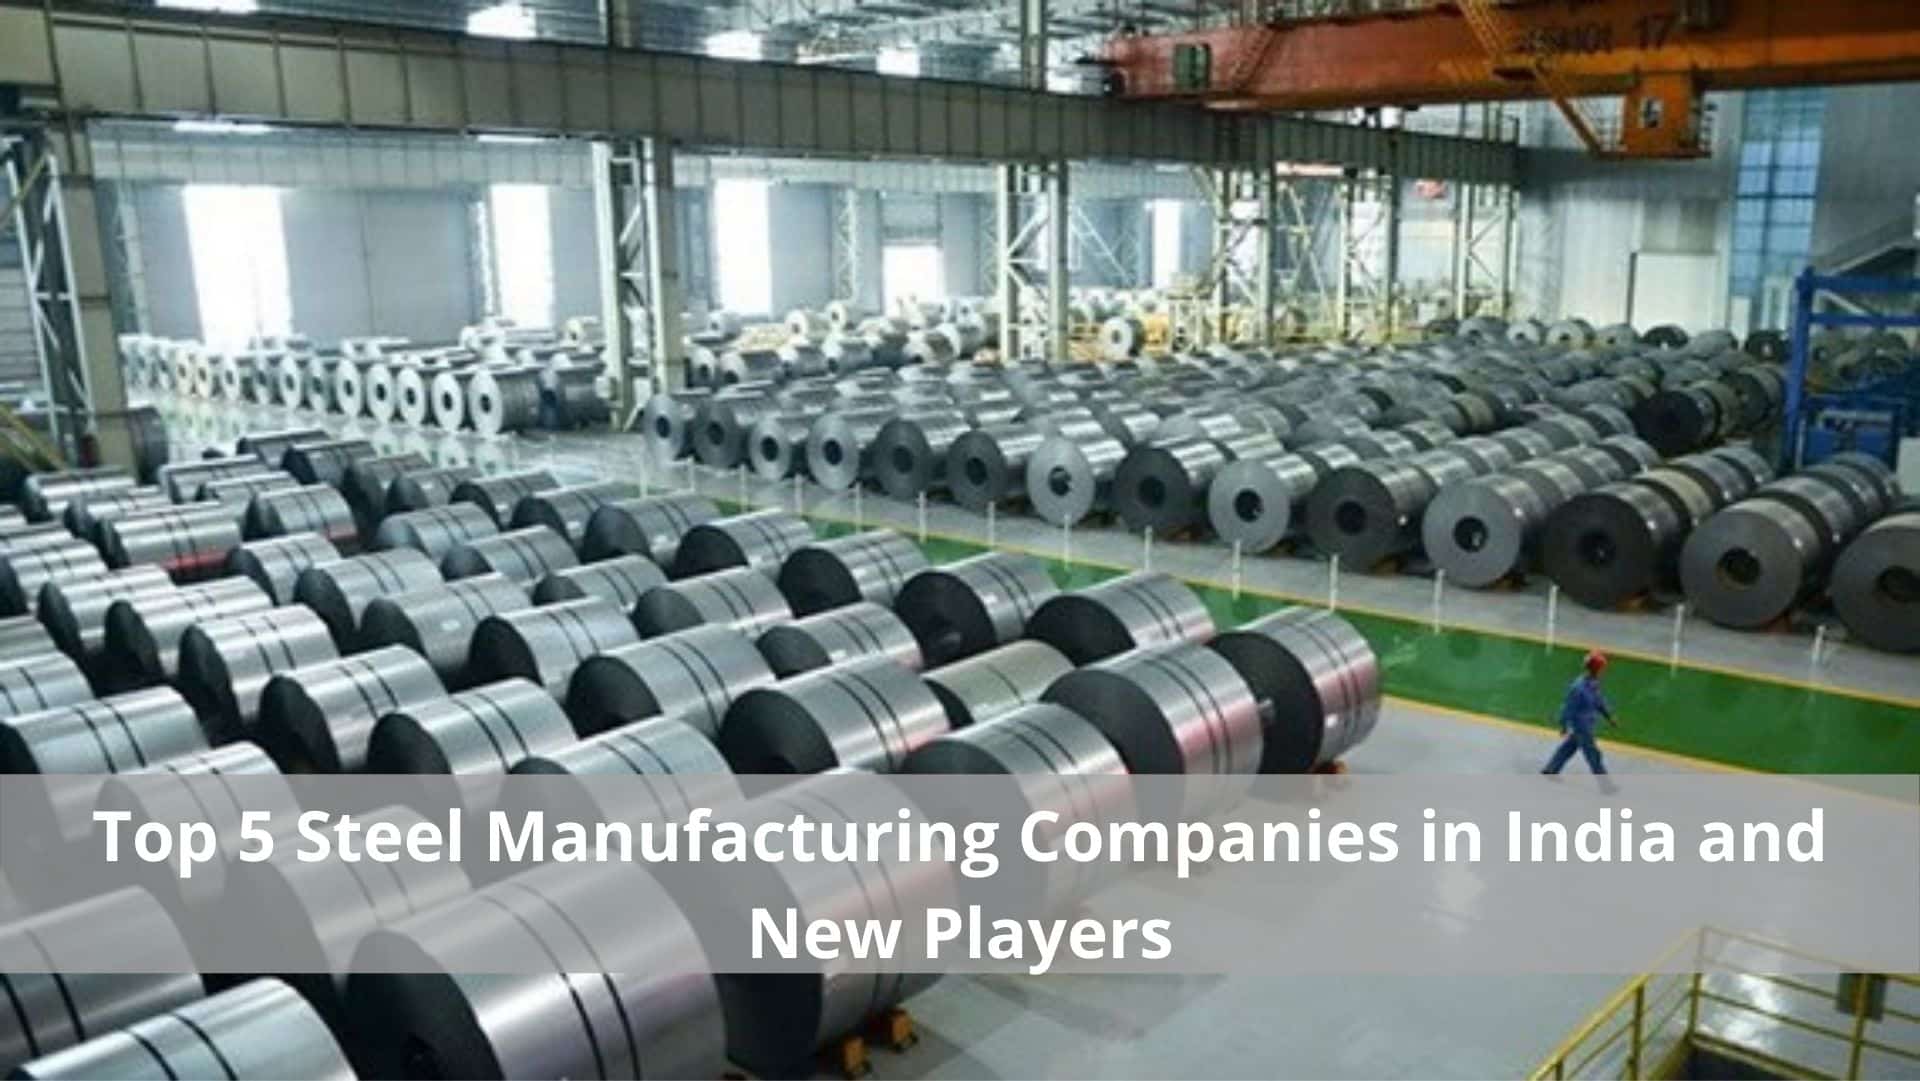 Top 5 Steel Manufacturing Companies in India and New Players